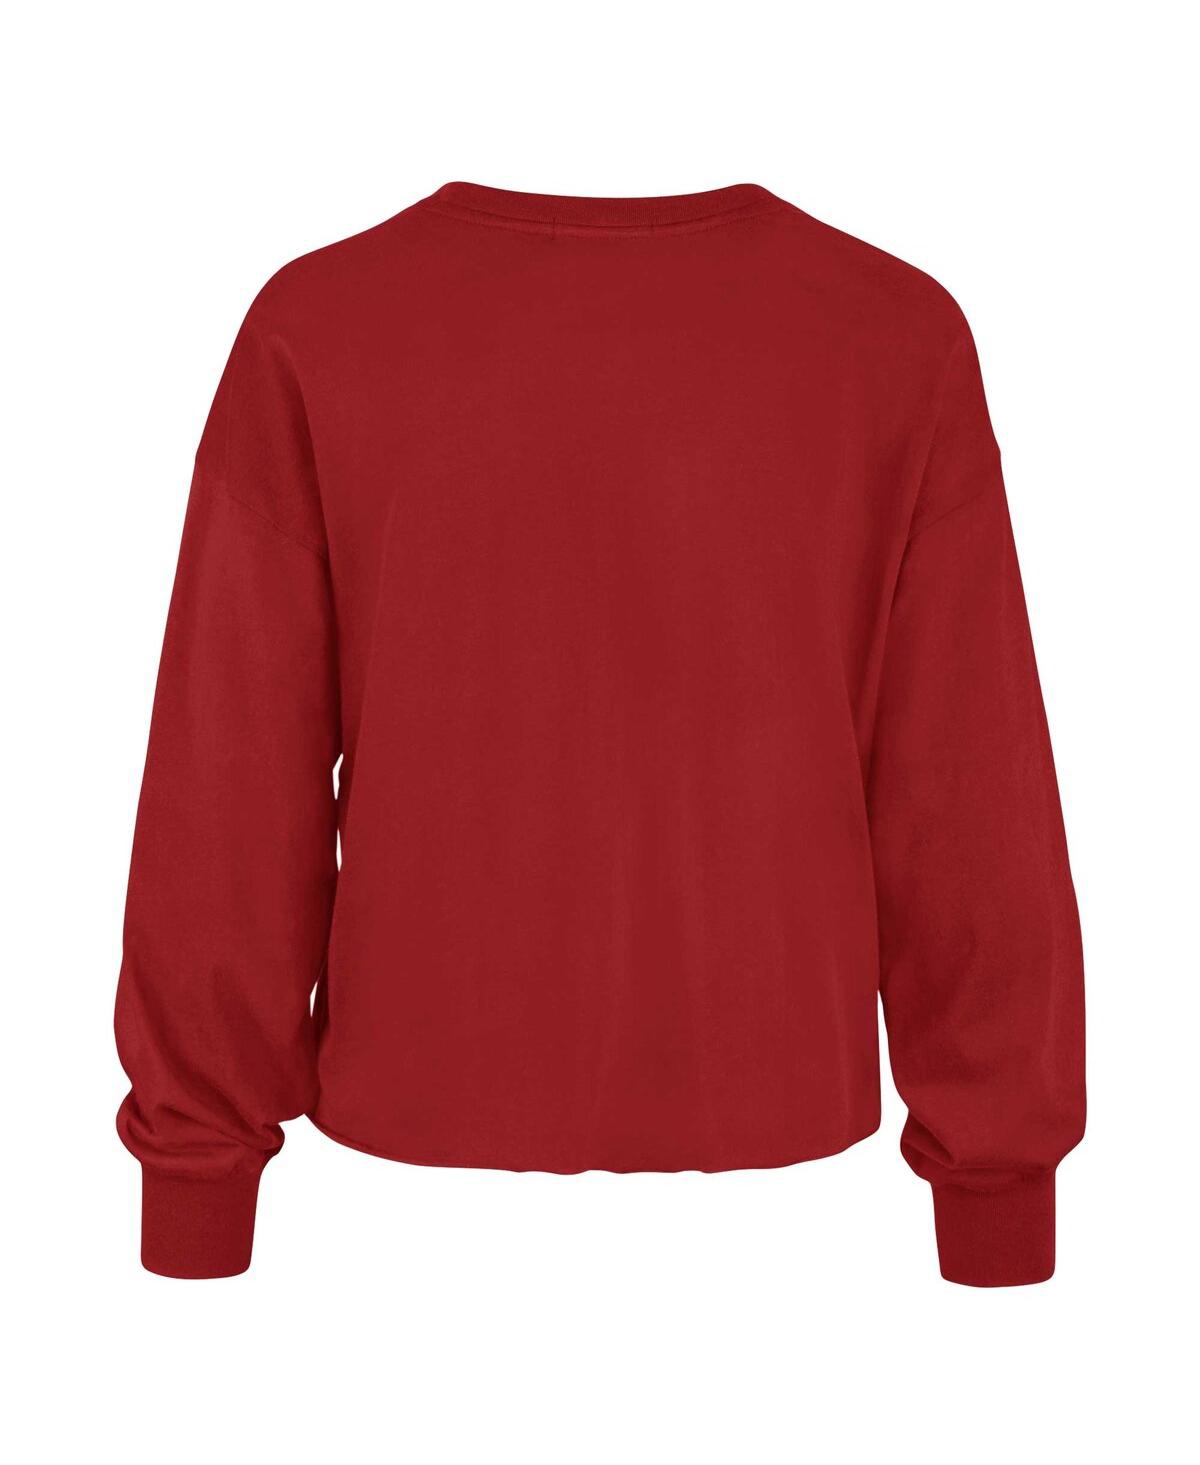 Shop 47 Brand Women's ' Red Distressed Wisconsin Badgers Bottom Line Parkway Long Sleeve T-shirt